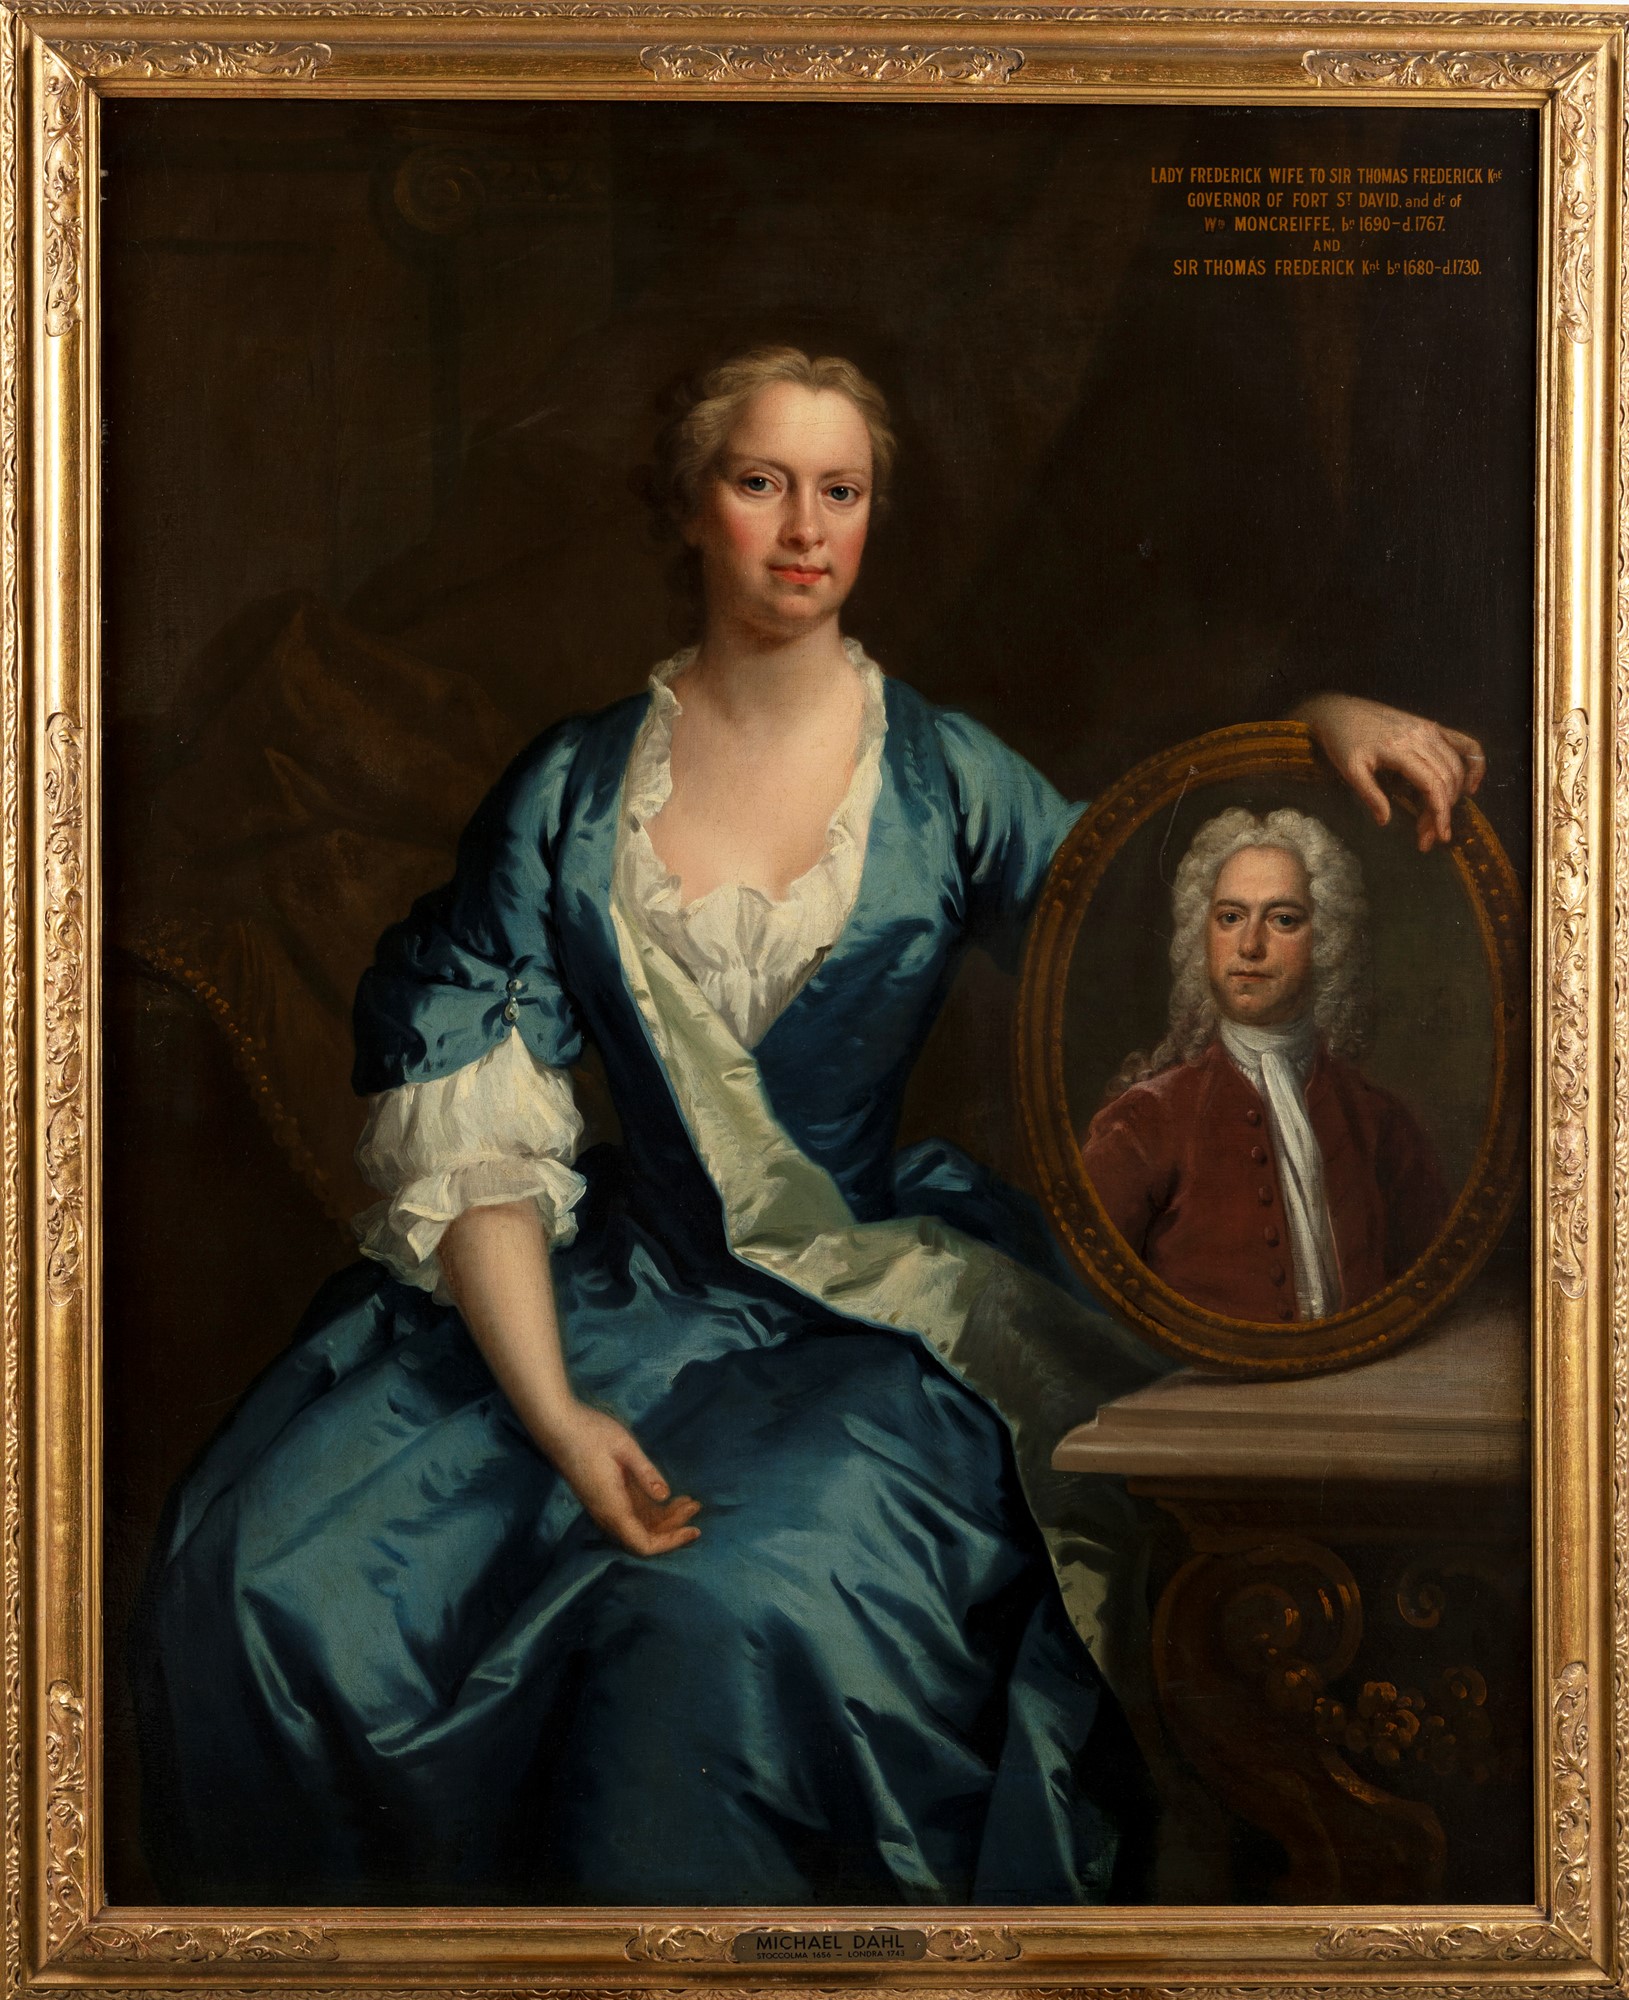 English School, XVIII Century - Portrait of Lady Frederick with painting of her husband, Sir Thomas